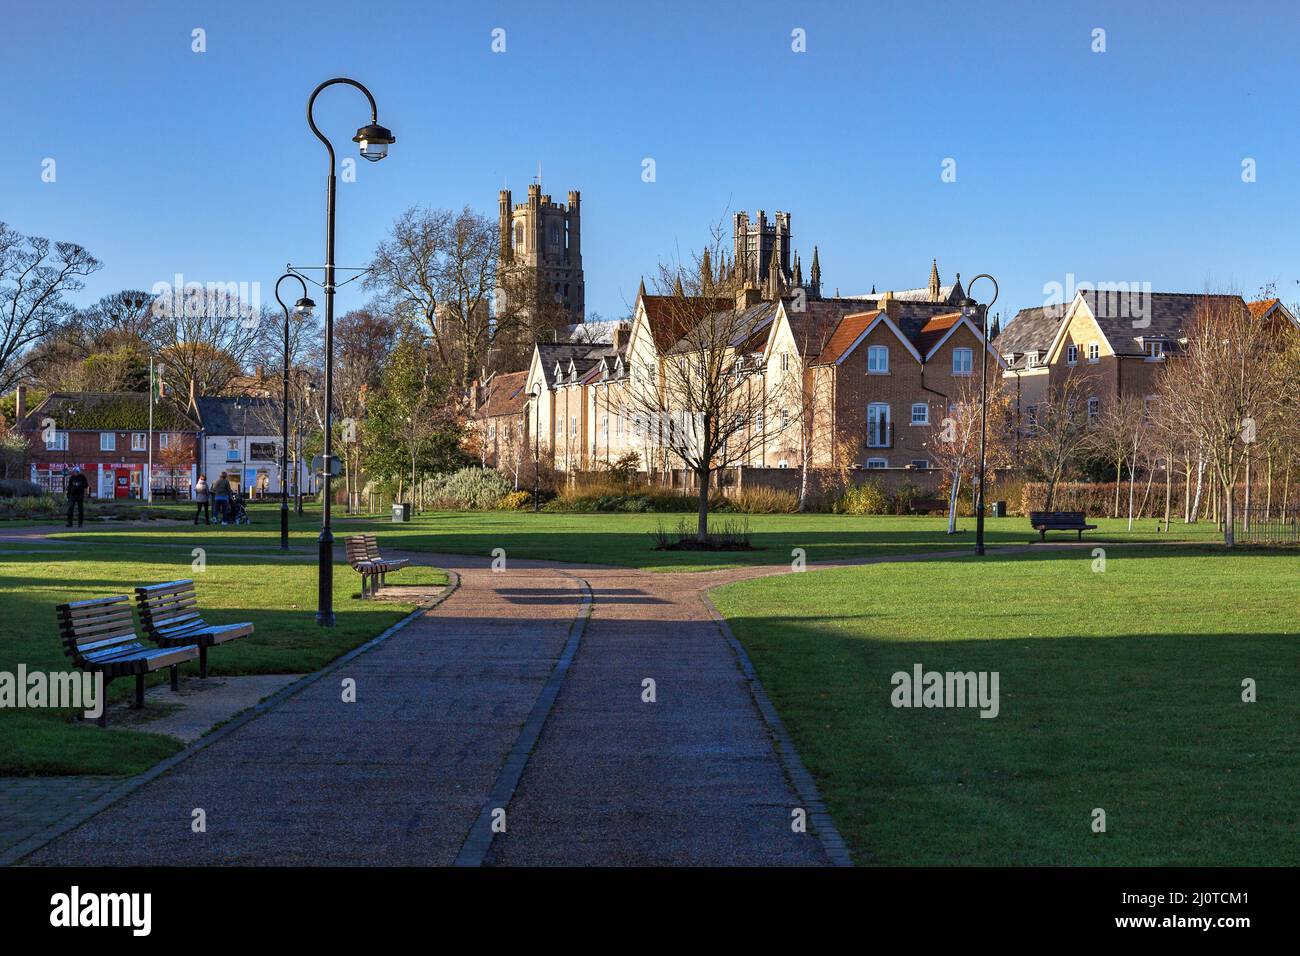 ELY, CAMBRIDGESHIRE, UK - NOVEMBER 23 : Blick vom Fluss Great Ouse in Richtung Ely Cathedral in Ely, Cambridgeshire am 2. November Stockfoto